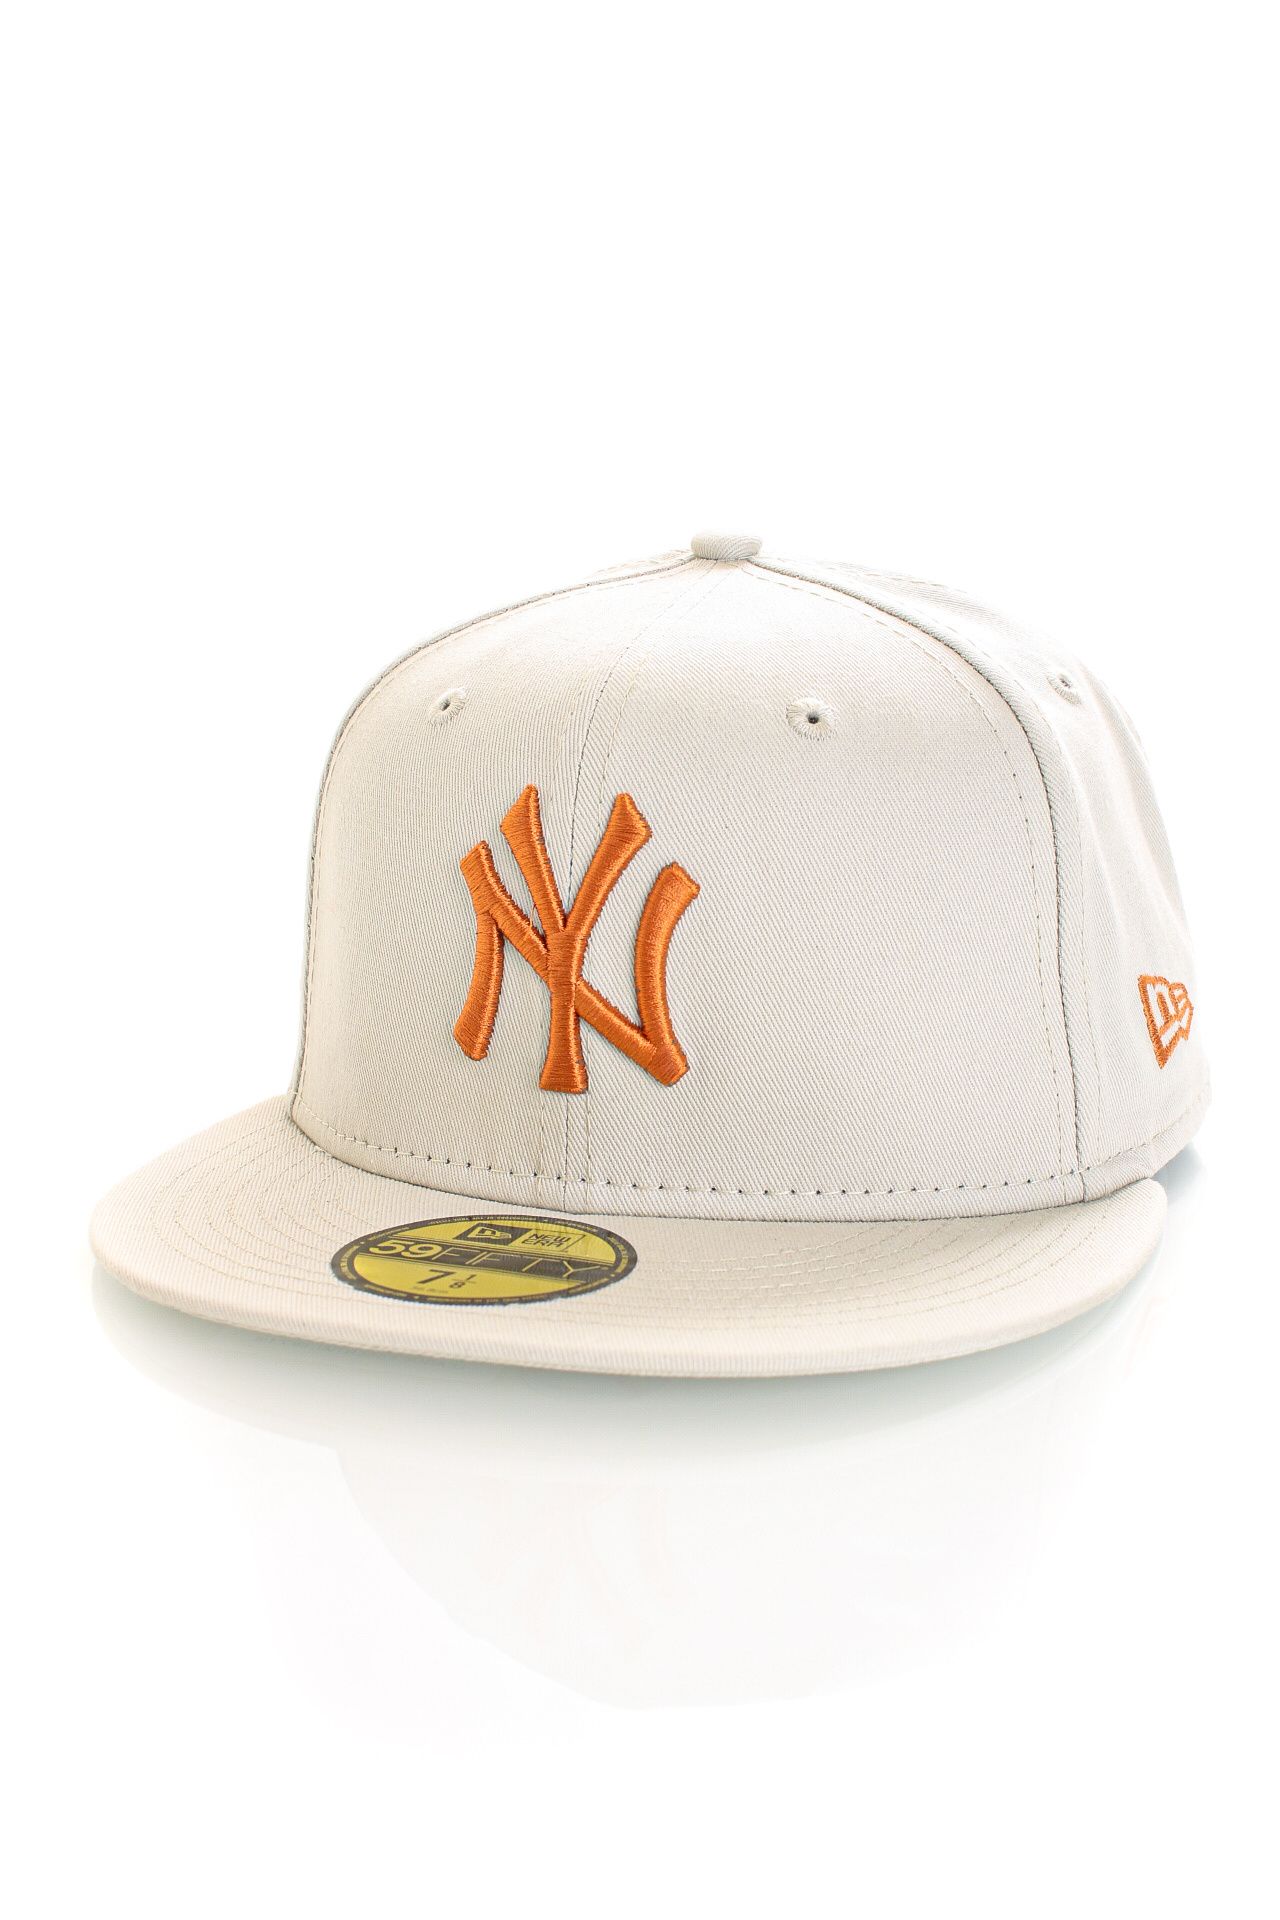 Afbeelding van New Era Fitted Cap NEW YORK YANKEES LEAGUE ESSENTIAL 59FIFTY STONE / TOFFEE NE60240538